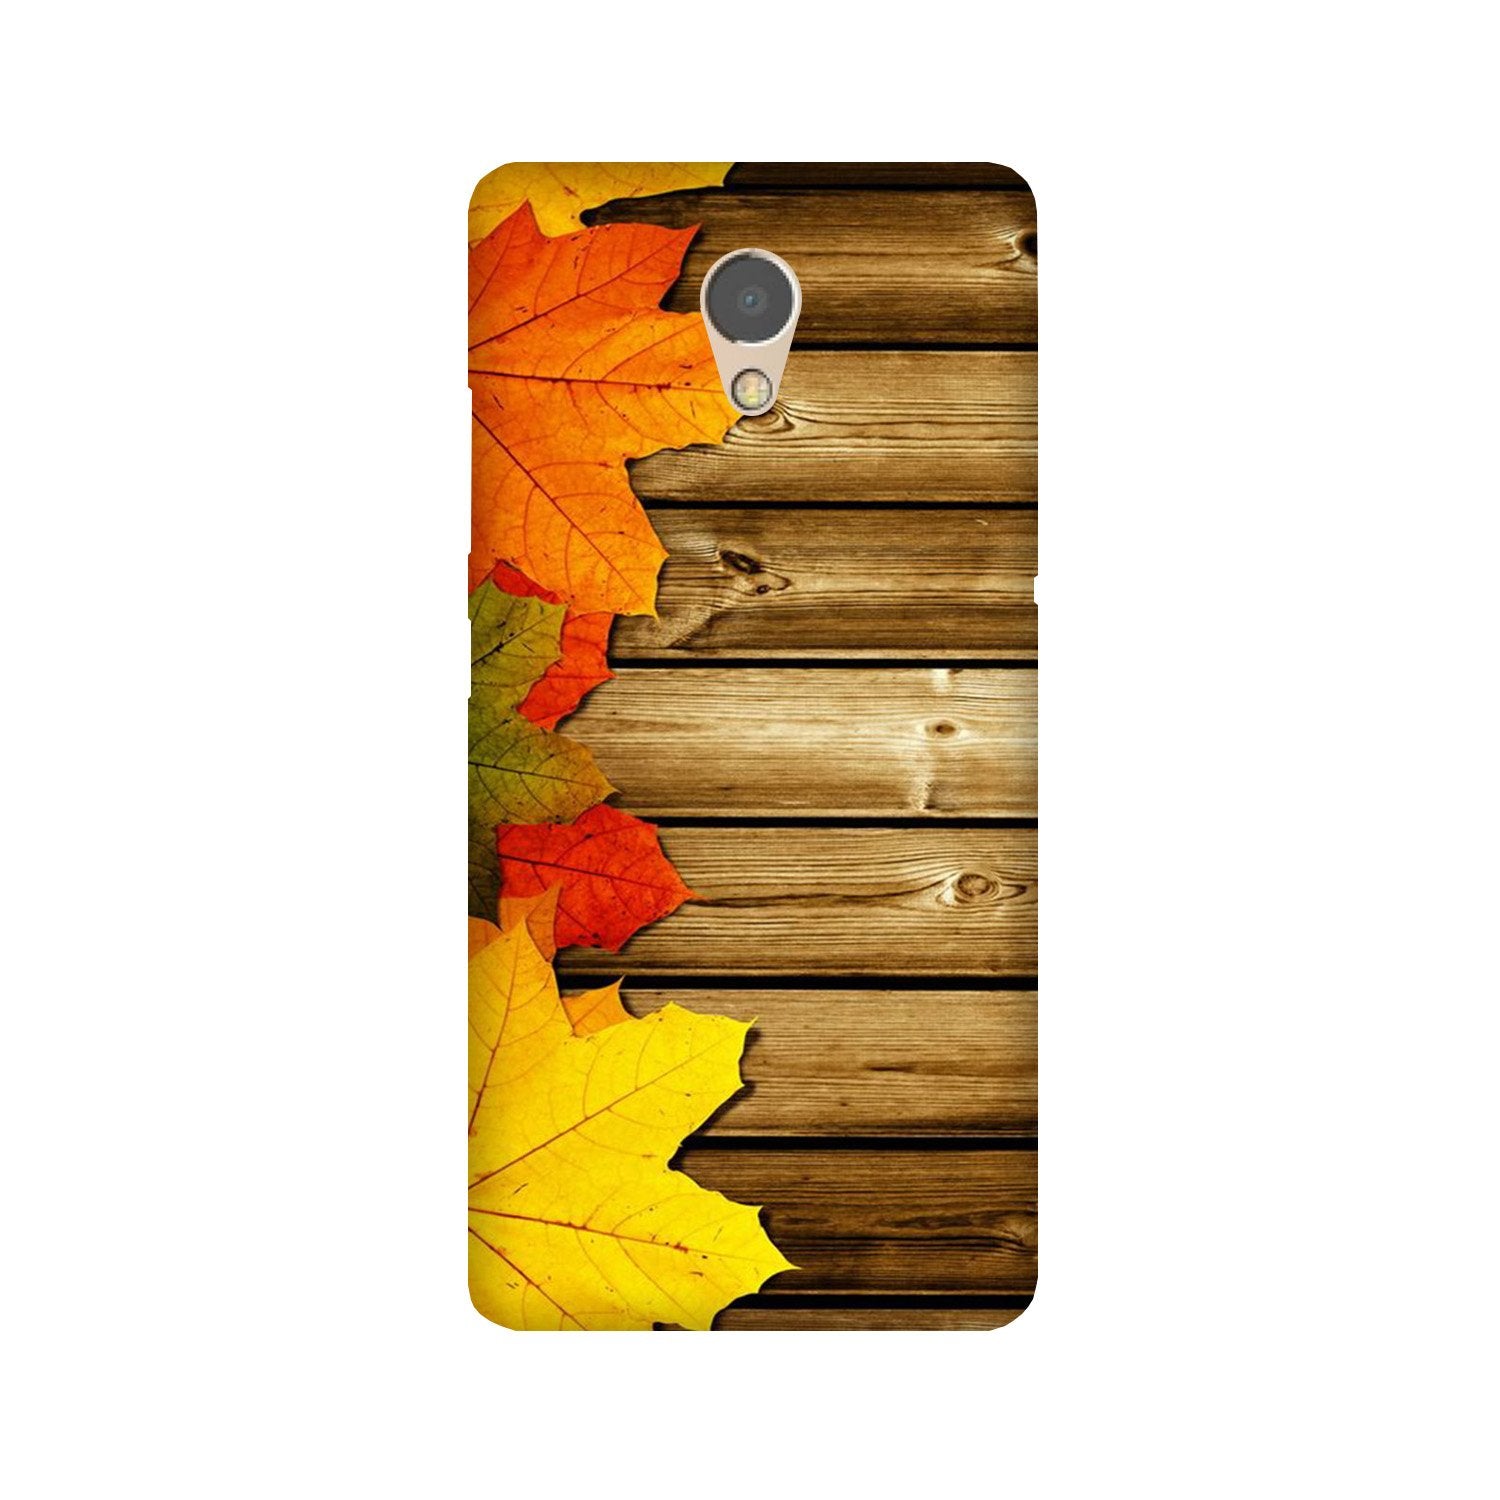 Wooden look3 Case for Lenovo P2